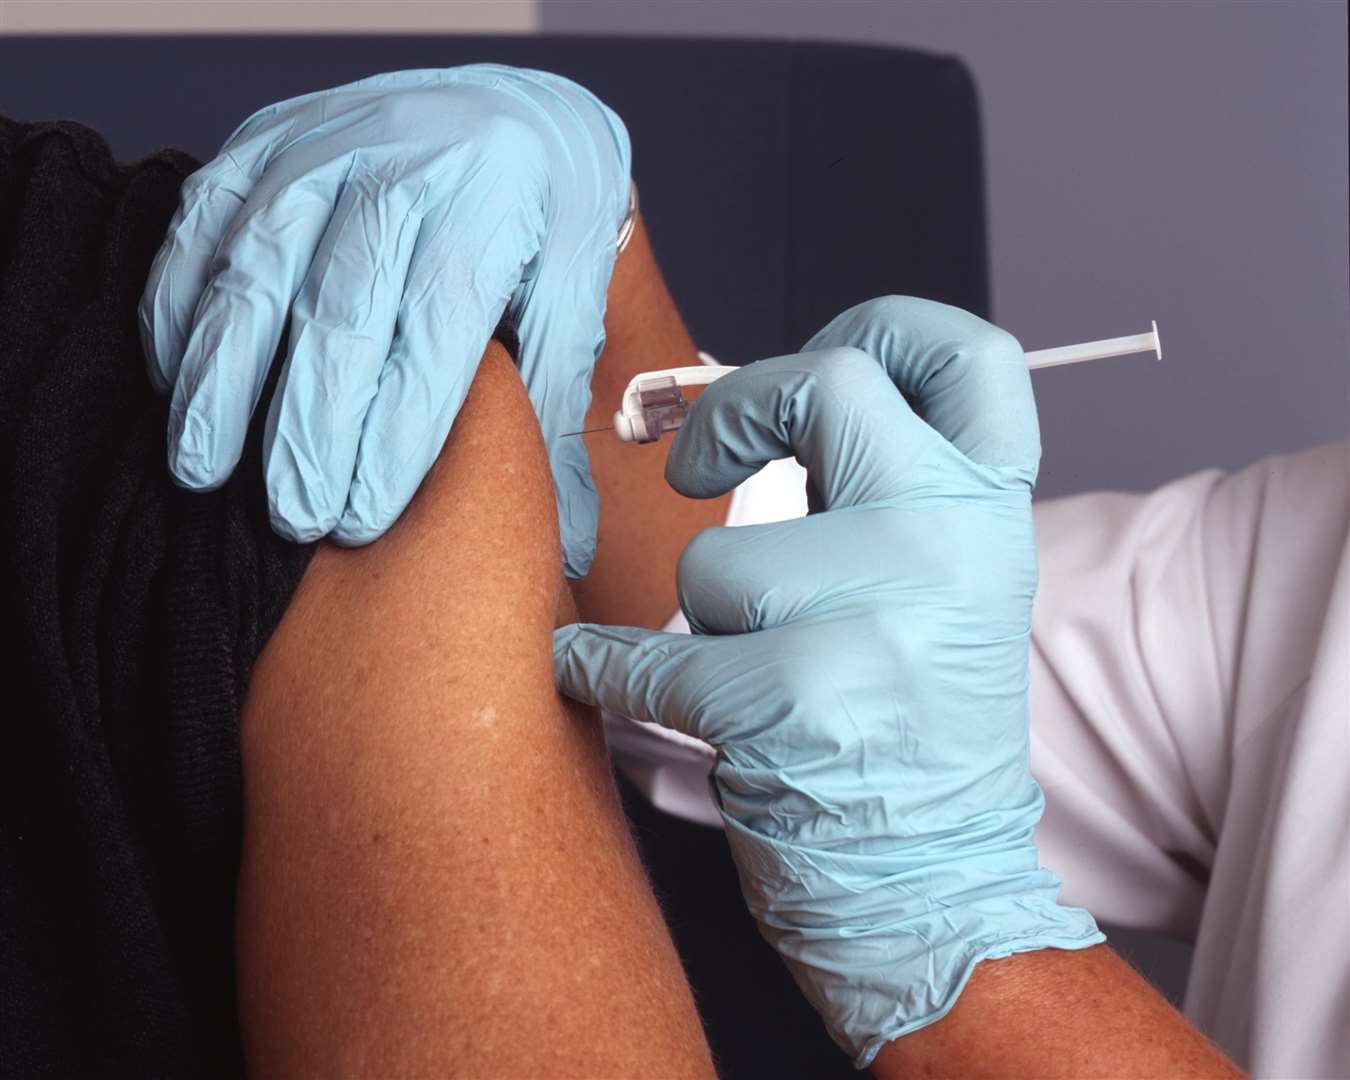 Vaccine rollout has extended to 44-year-olds